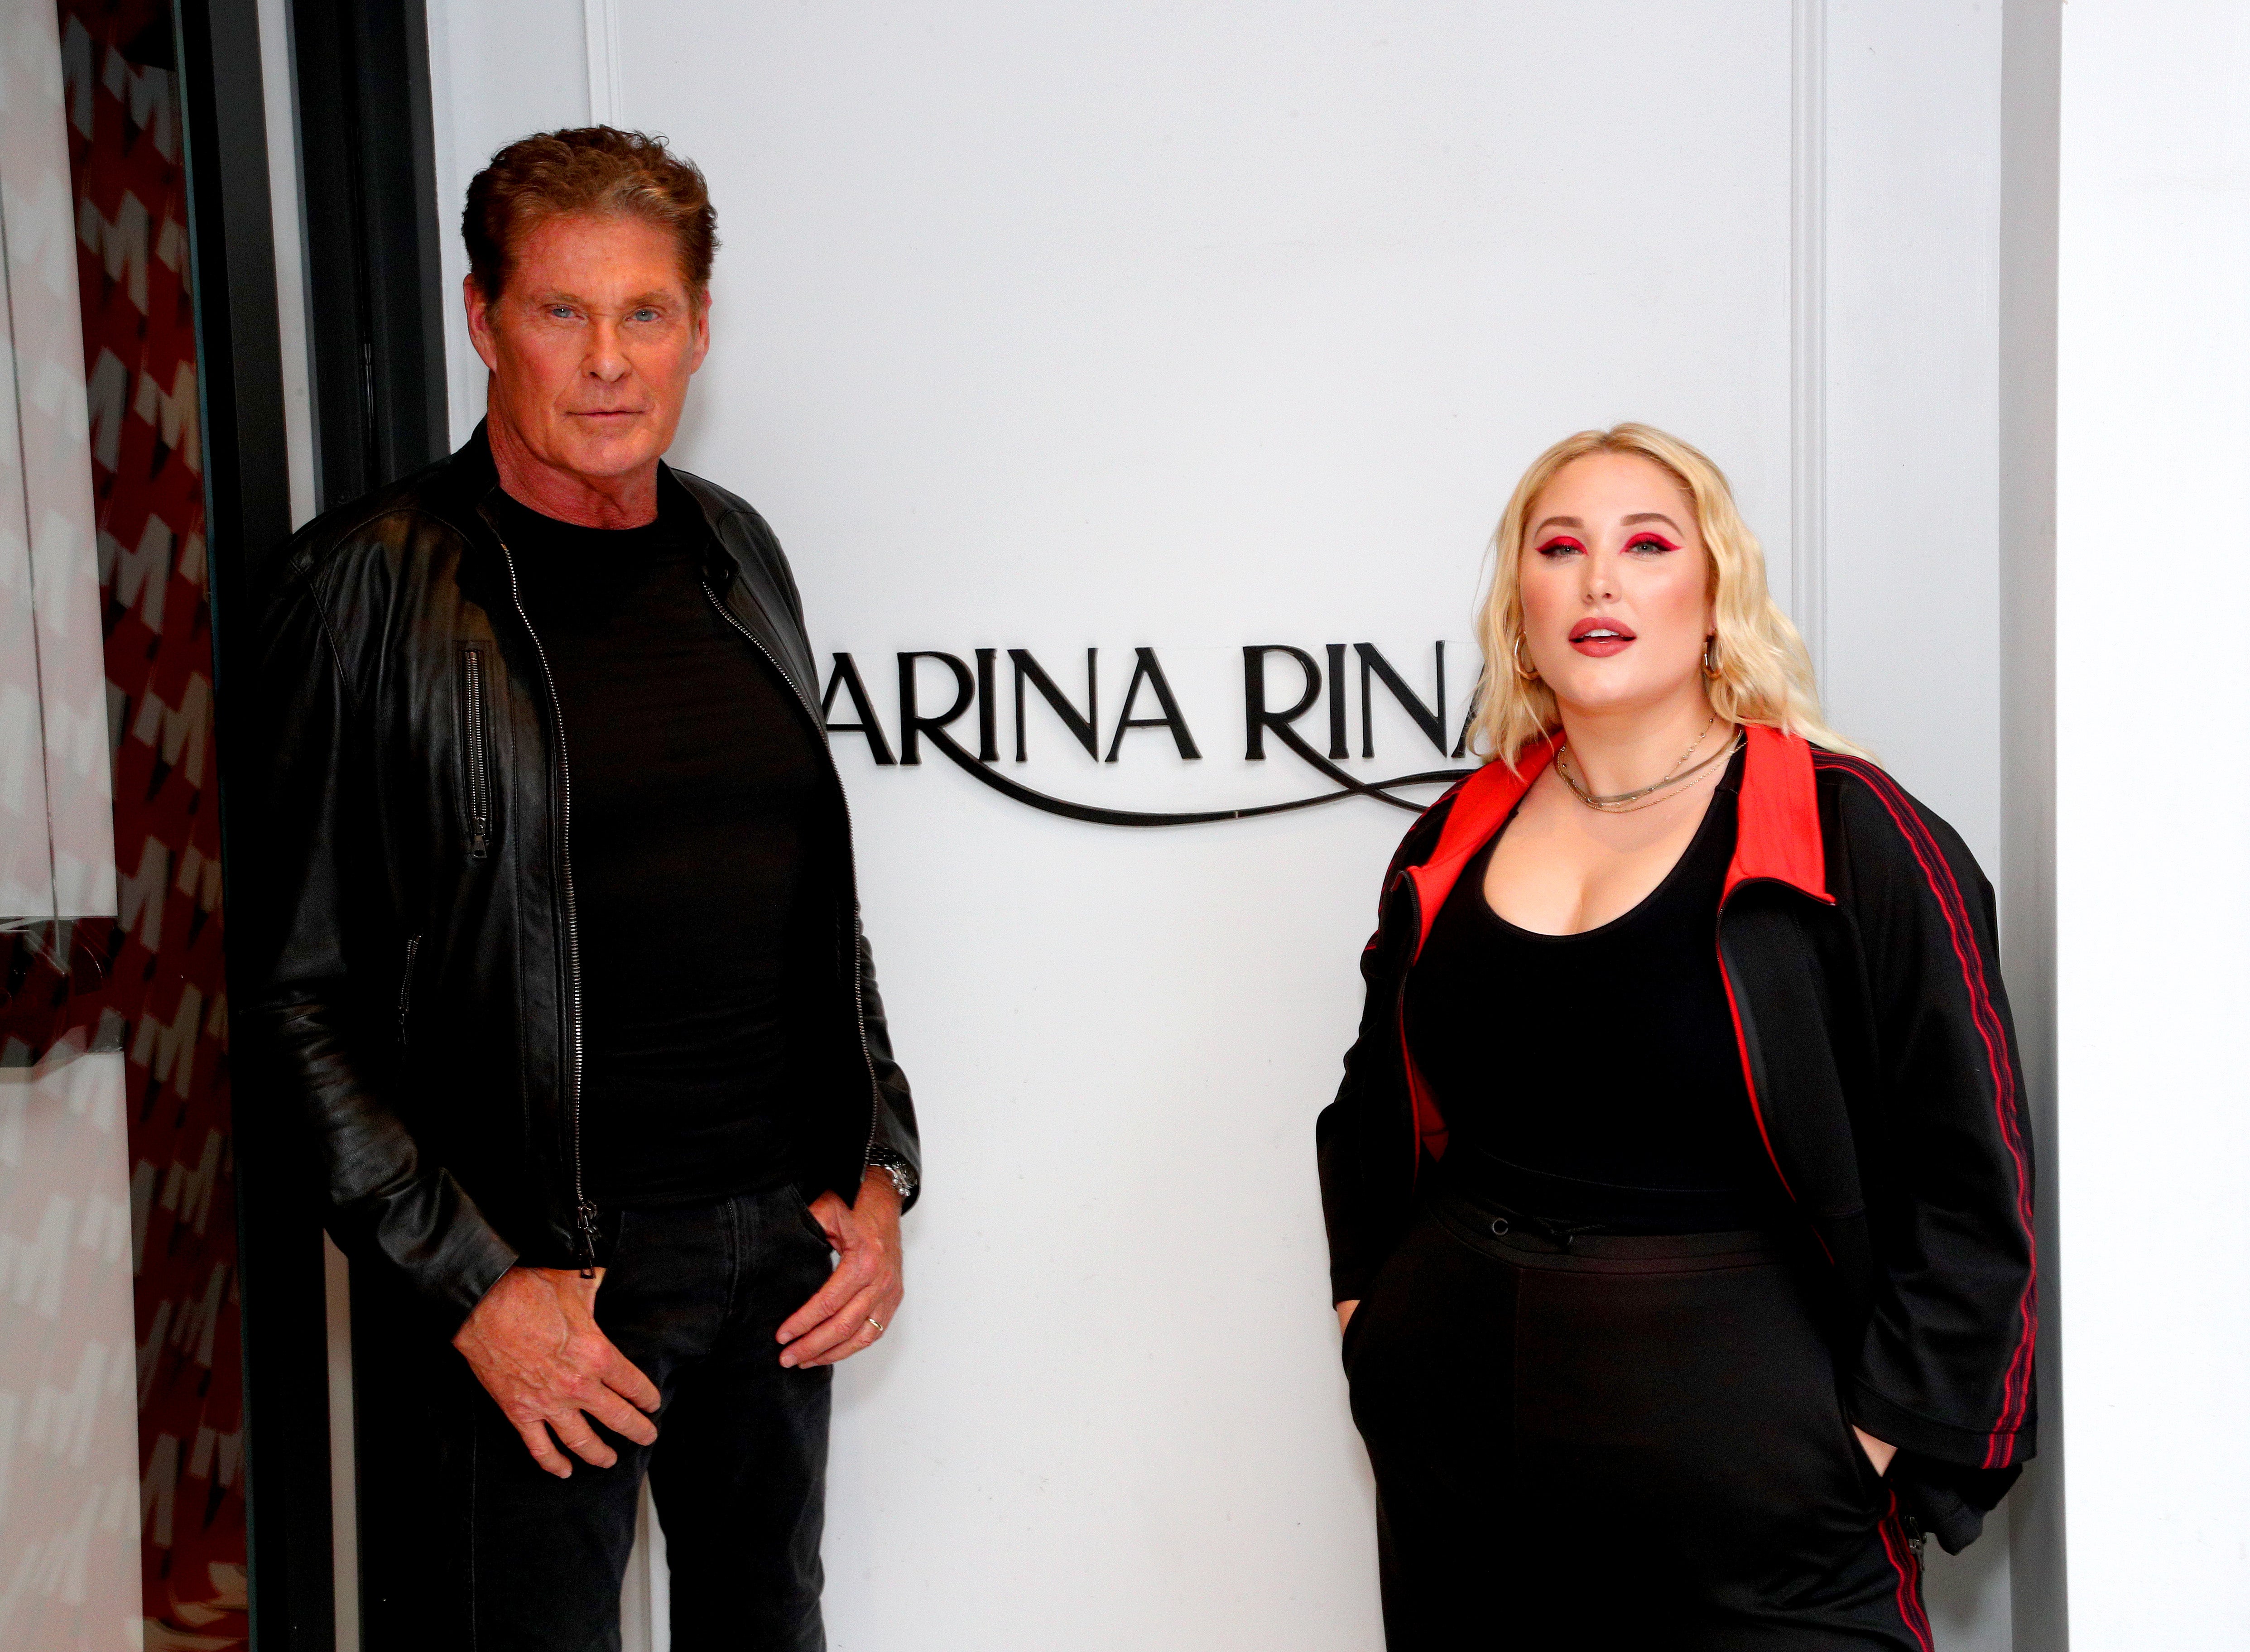 File image: David Hasselhoff and Hayley Hasselhoff attend the GYM Capsule Collection at Marina Rinaldi Boutique